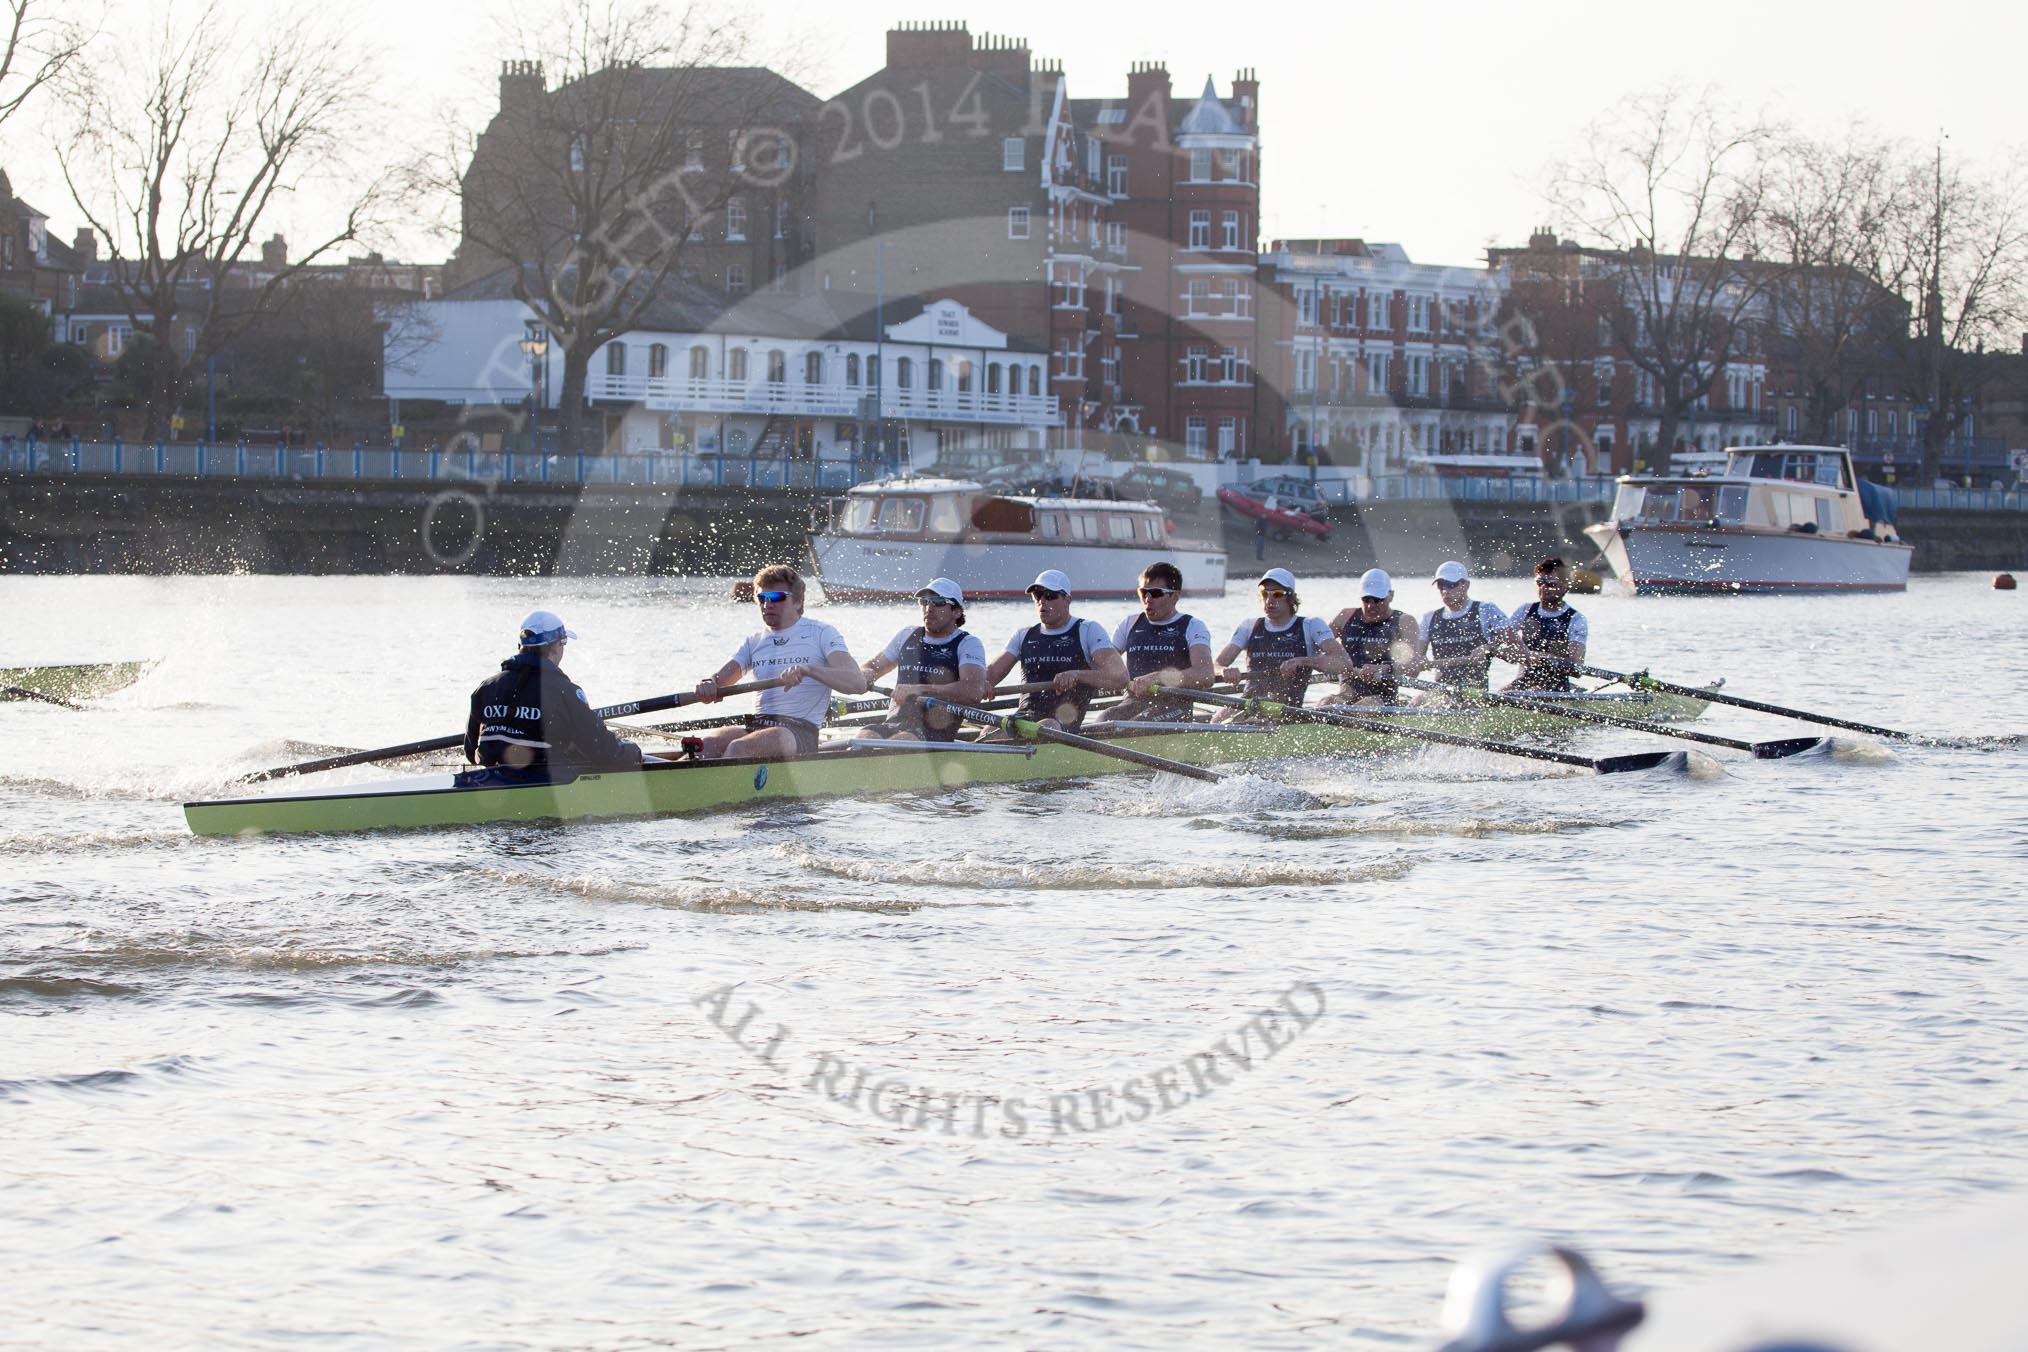 The Boat Race season 2014 - fixture OUBC vs German U23: The OUBC boat bewteen Putney Bridge and the boat houses..
River Thames between Putney Bridge and Chiswick Bridge,



on 08 March 2014 at 16:46, image #38